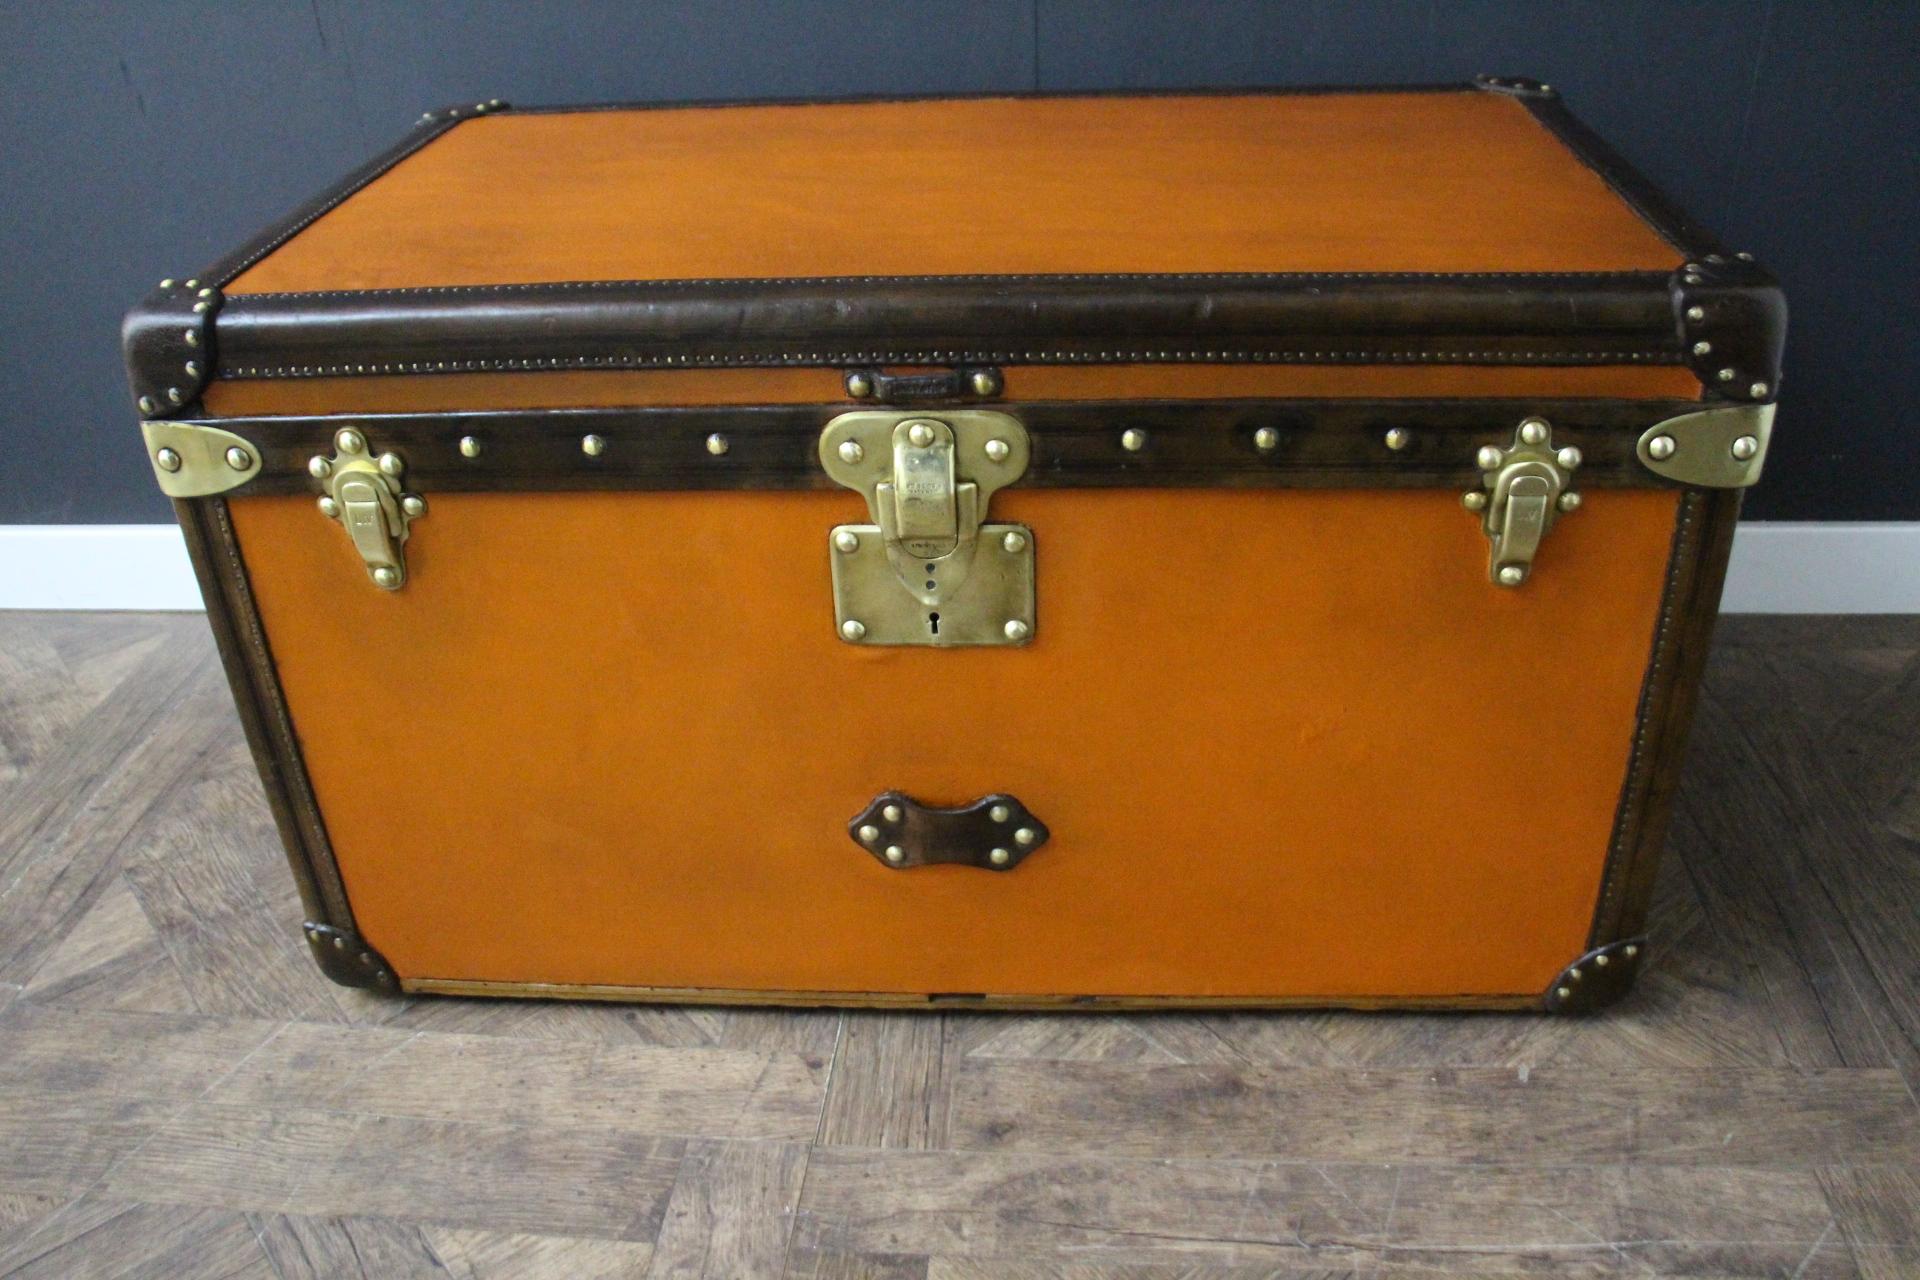 This magnificent little Louis Vuitton courrier trunk features the very sought after orange canvas , Louis Vuitton stamped solid brass locks, studs and latches as well as beautiful large side handles in leather. It also has got all chocolate leather